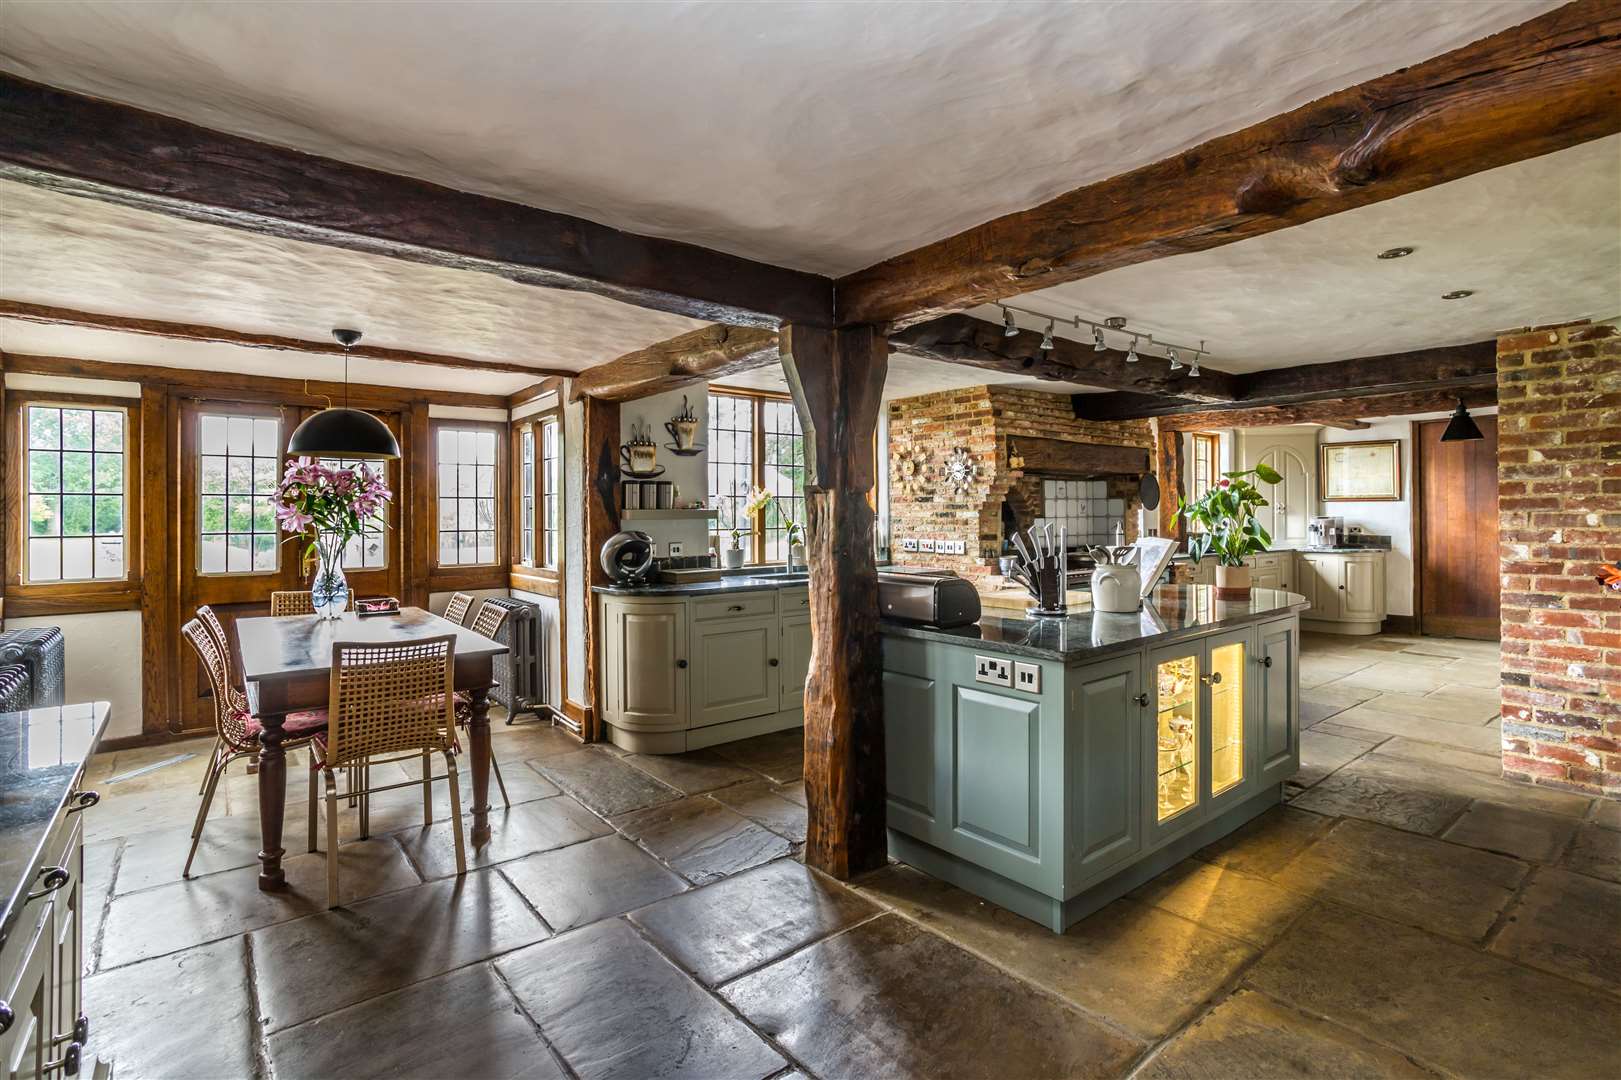 Beams, an aga, island and wine fridge in the kitchen Picture: Hamptons